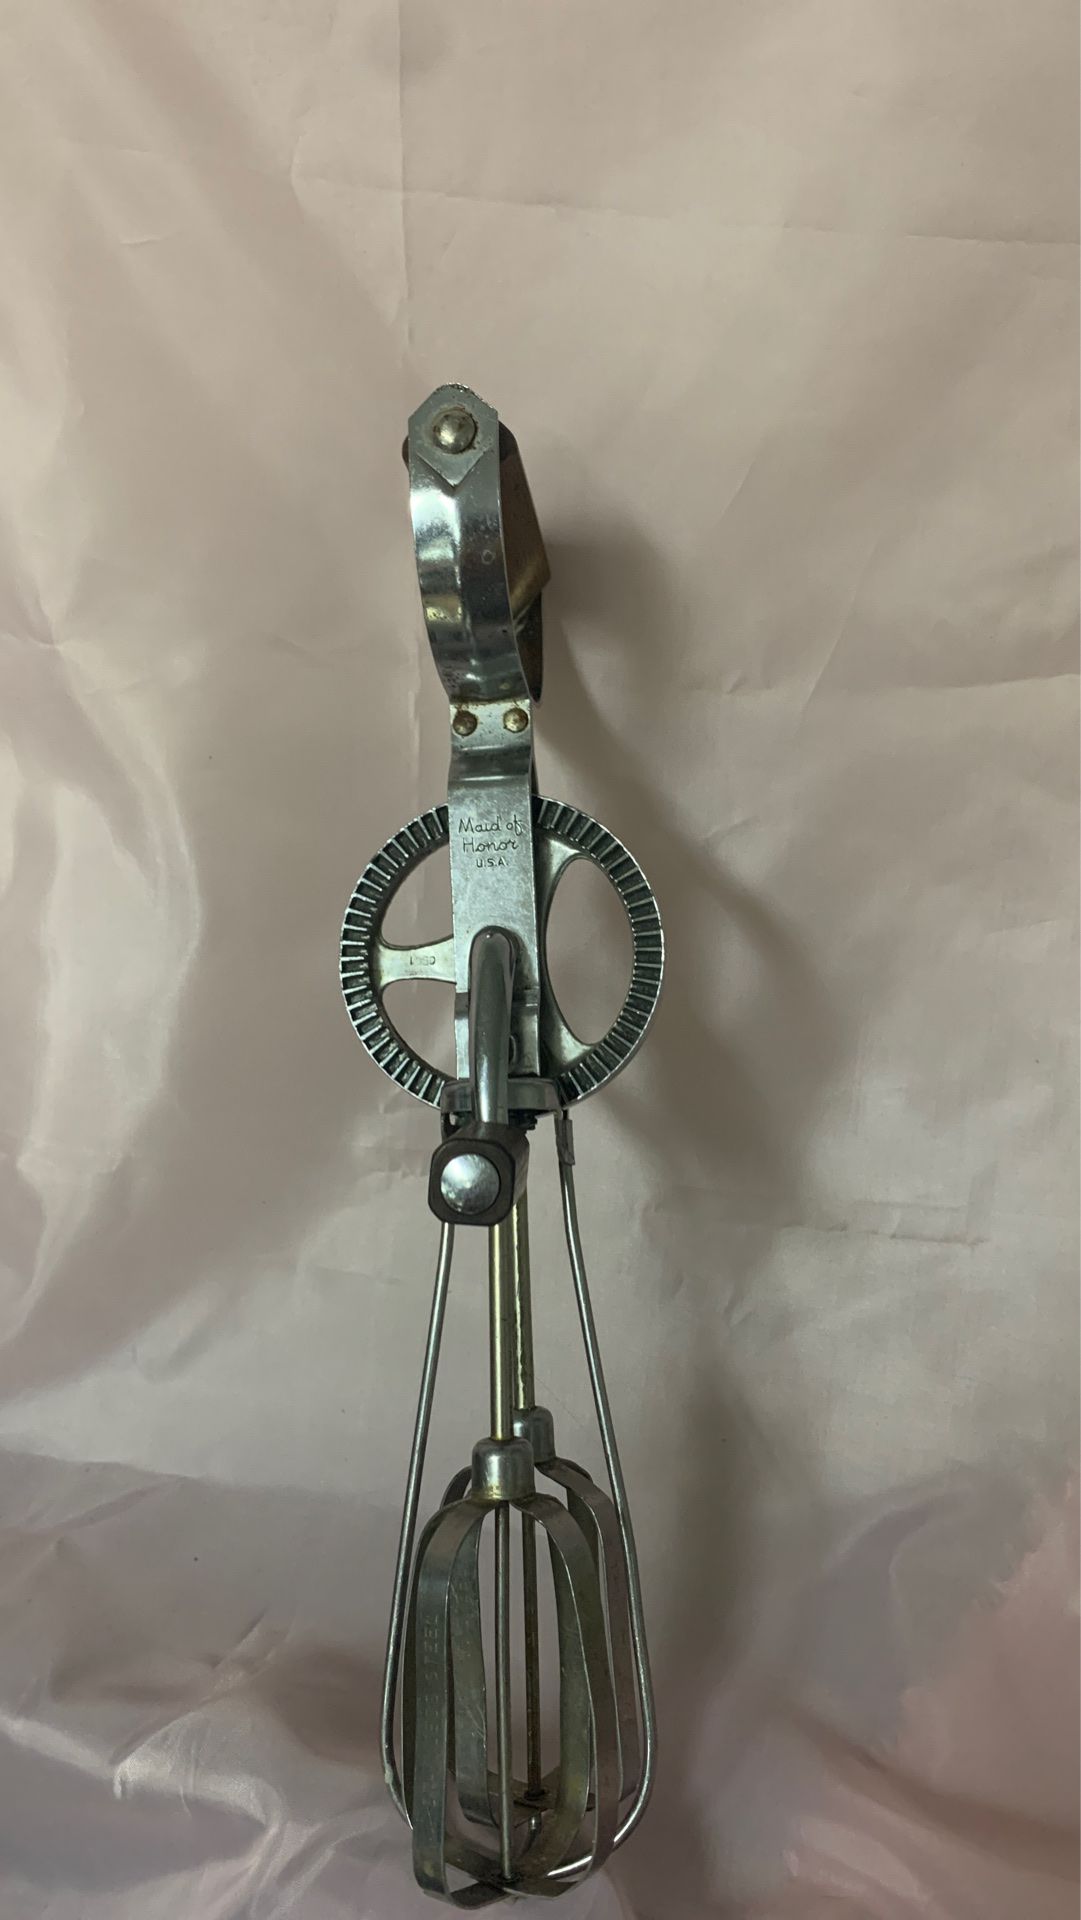 Oster Hand Mixer And Icing Kit for Sale in Plano, TX - OfferUp